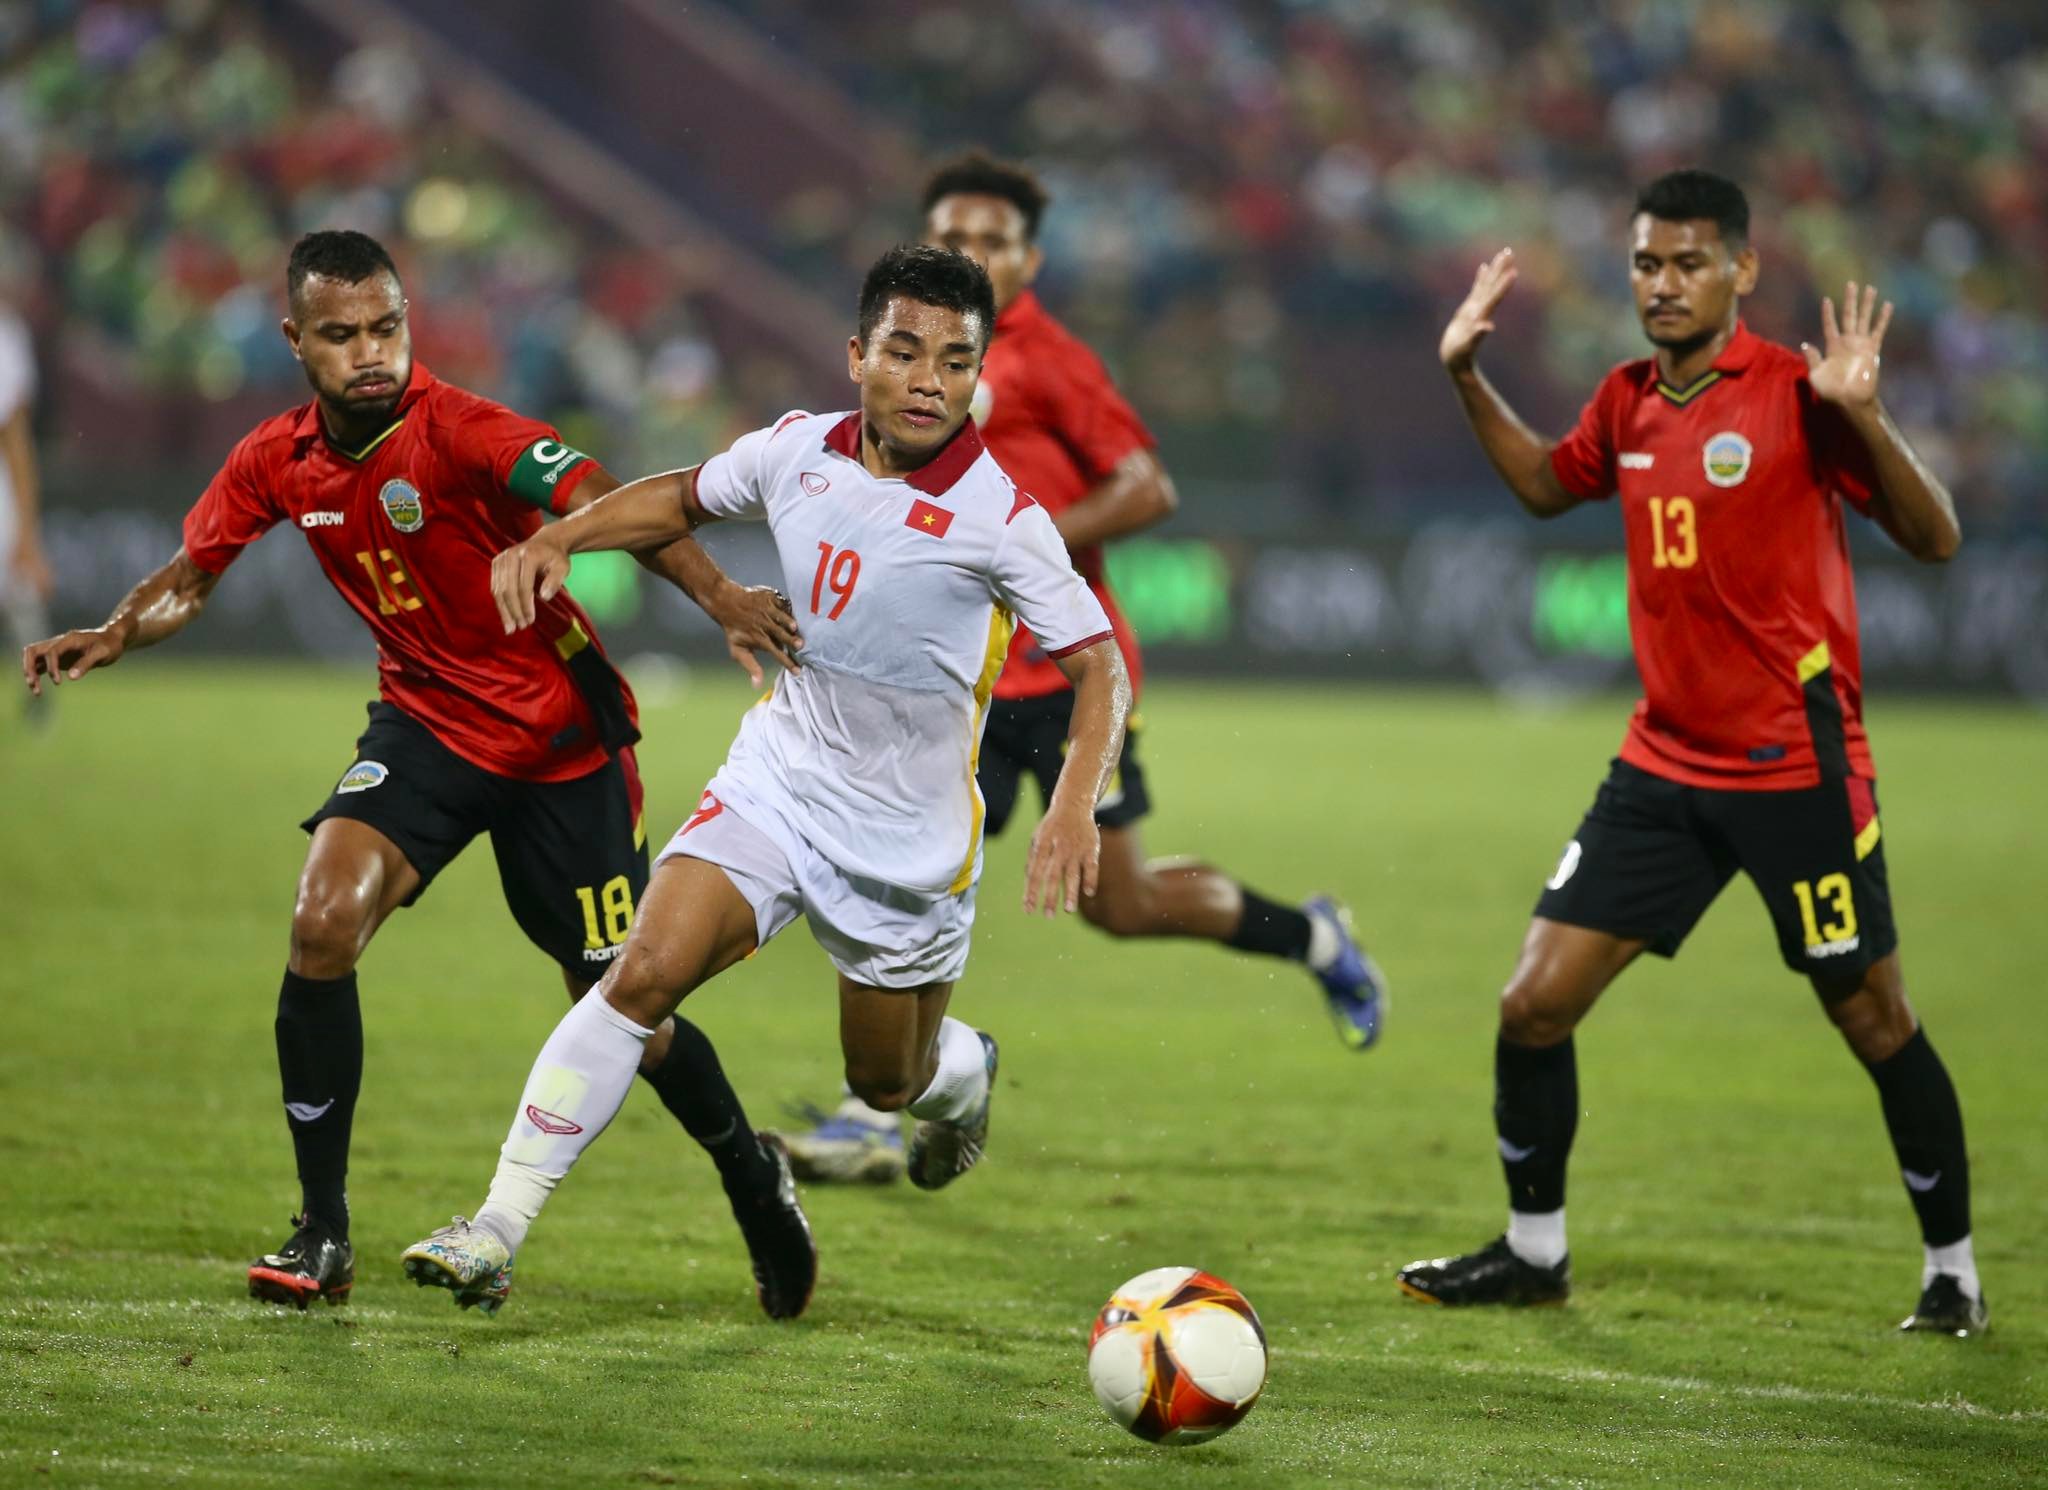 Vietnam defeat Timor Leste to advance to SEA Games men’s football semis as group leaders